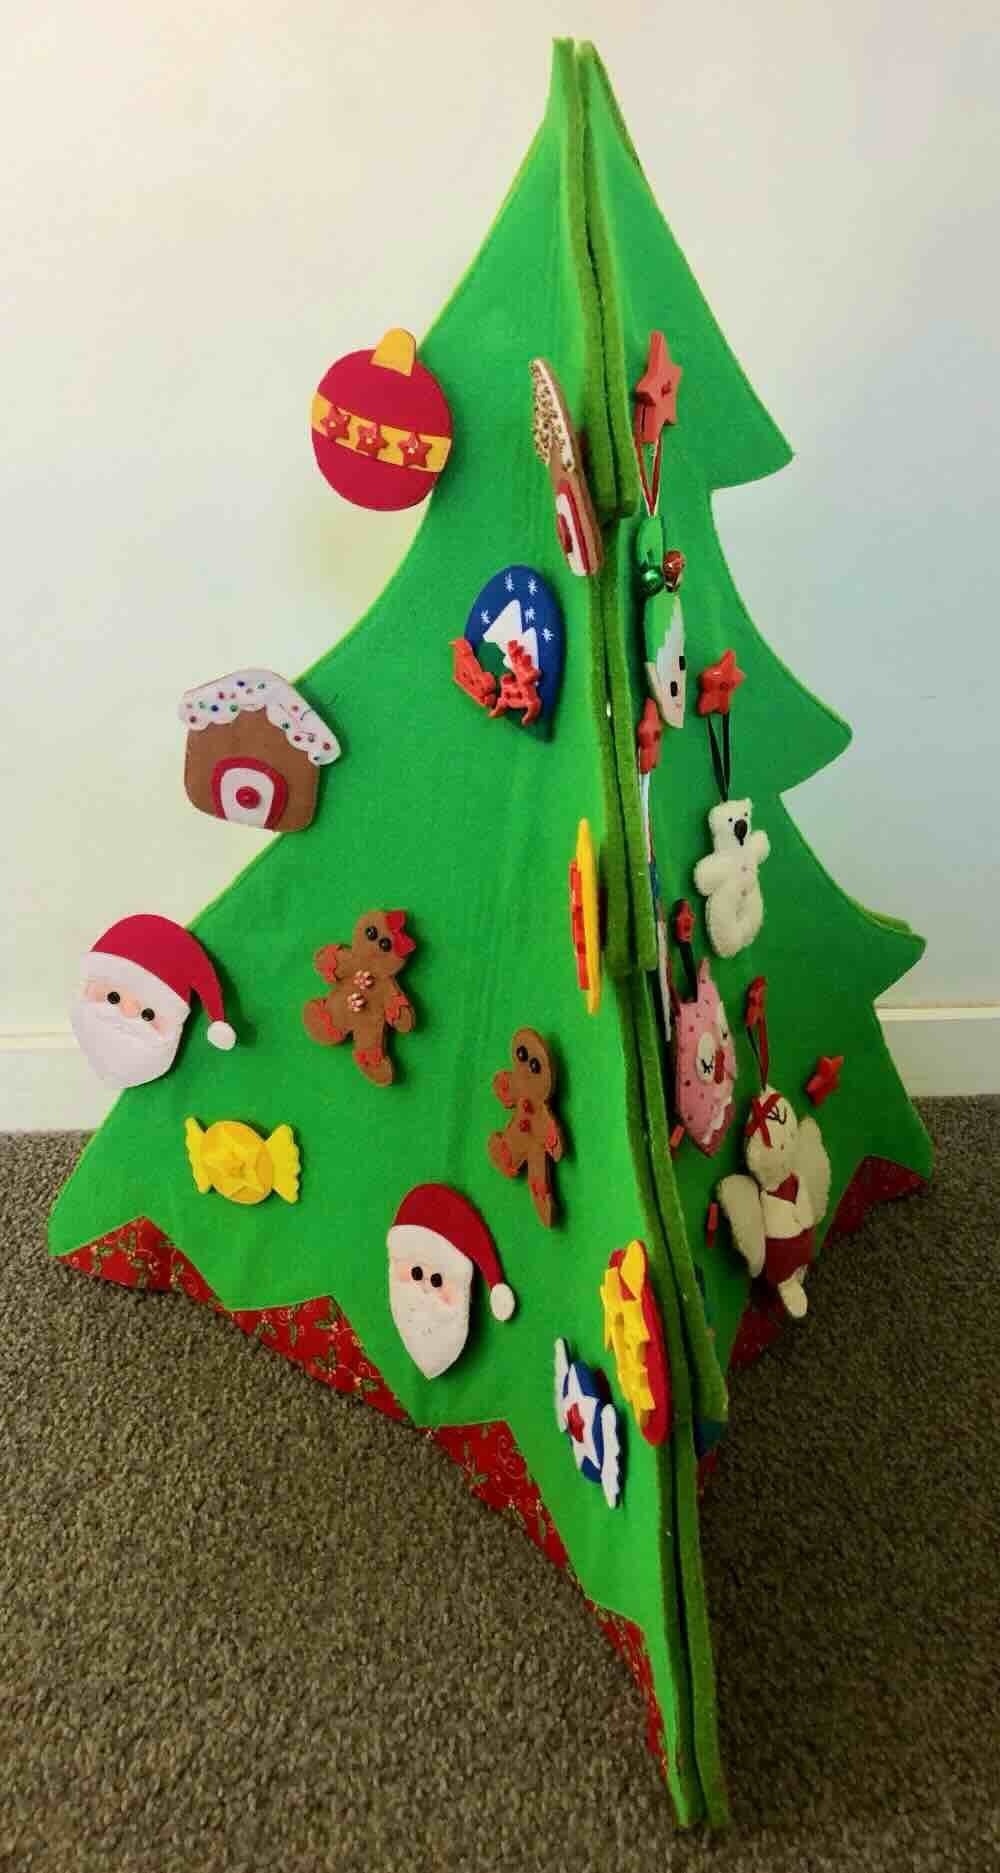 Felt Christmas Tree 2023 after 6 years of playing